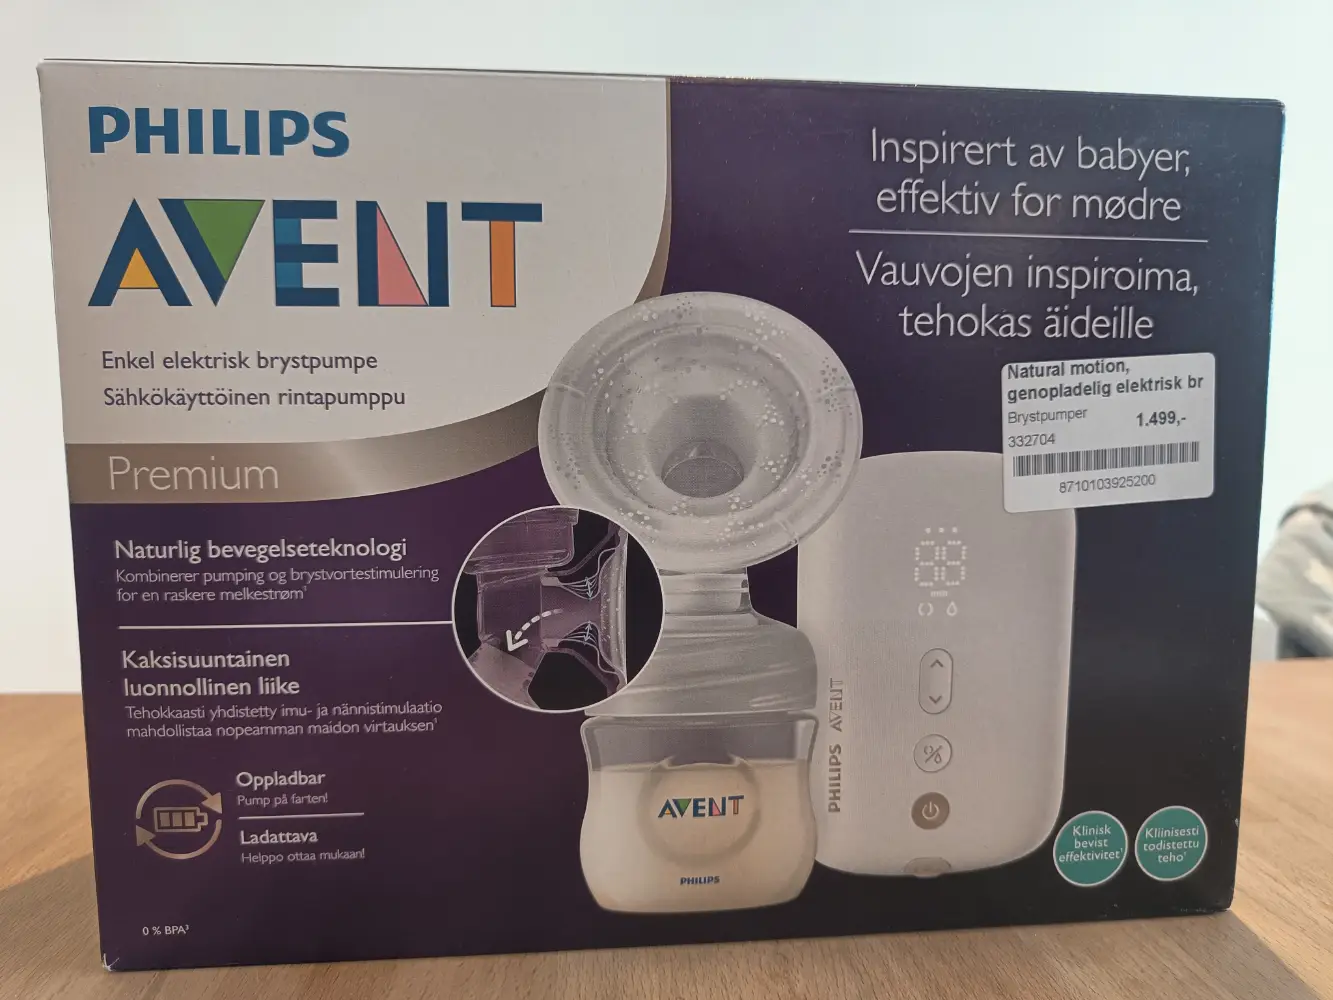 Philips AVENT Electric Breast Pump